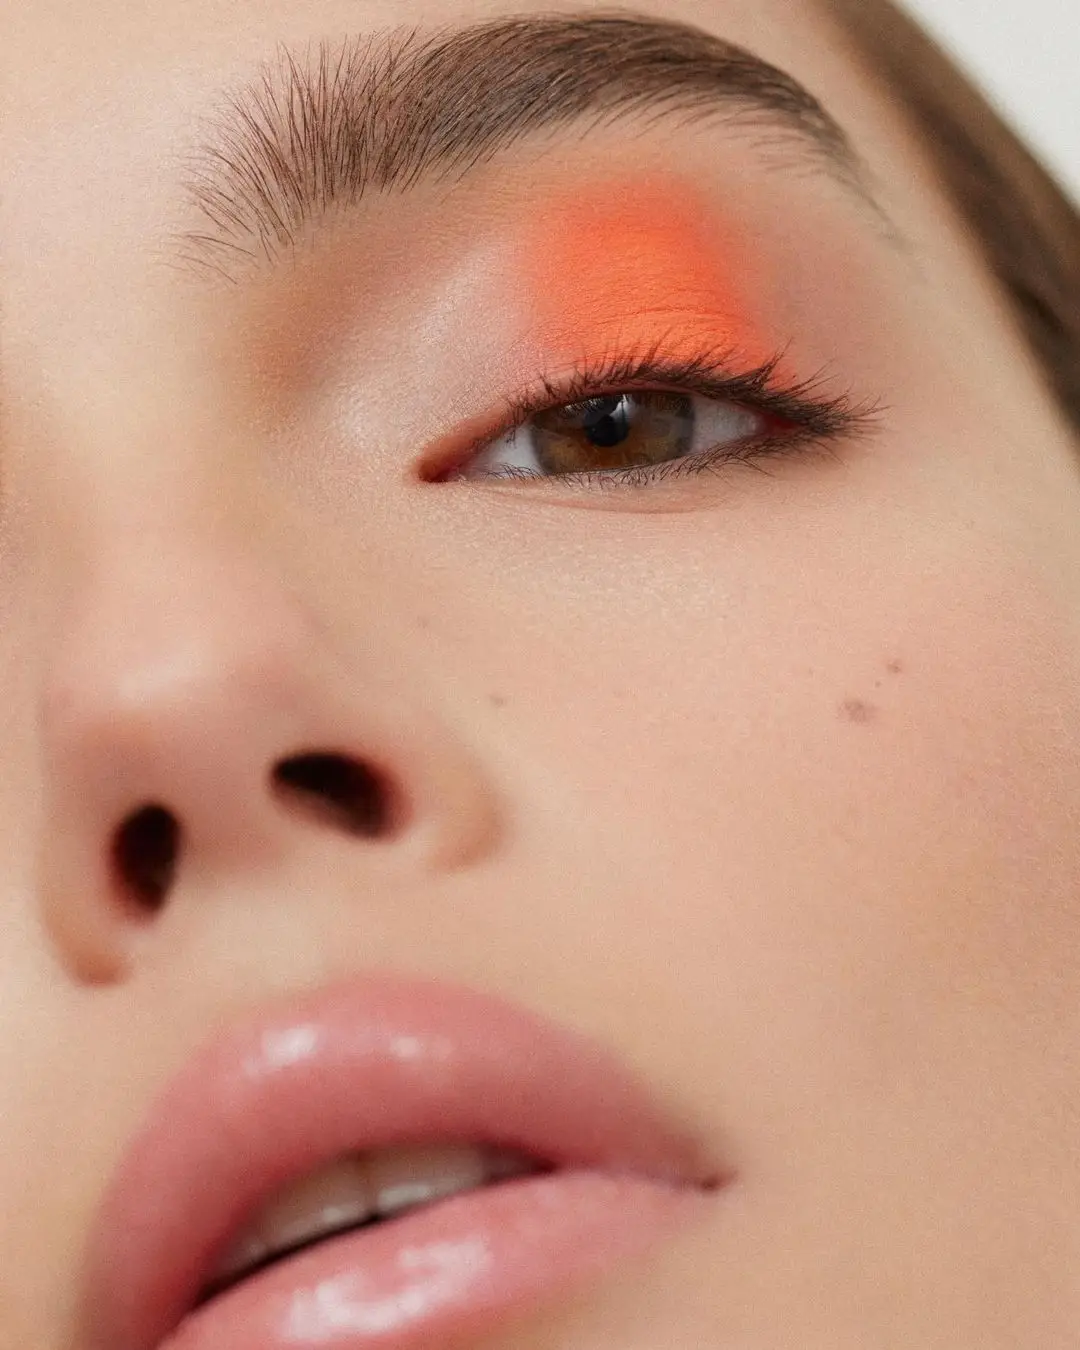 5 Genius Ways to Use Leftover Pumpkin in Your Beauty Routine ...